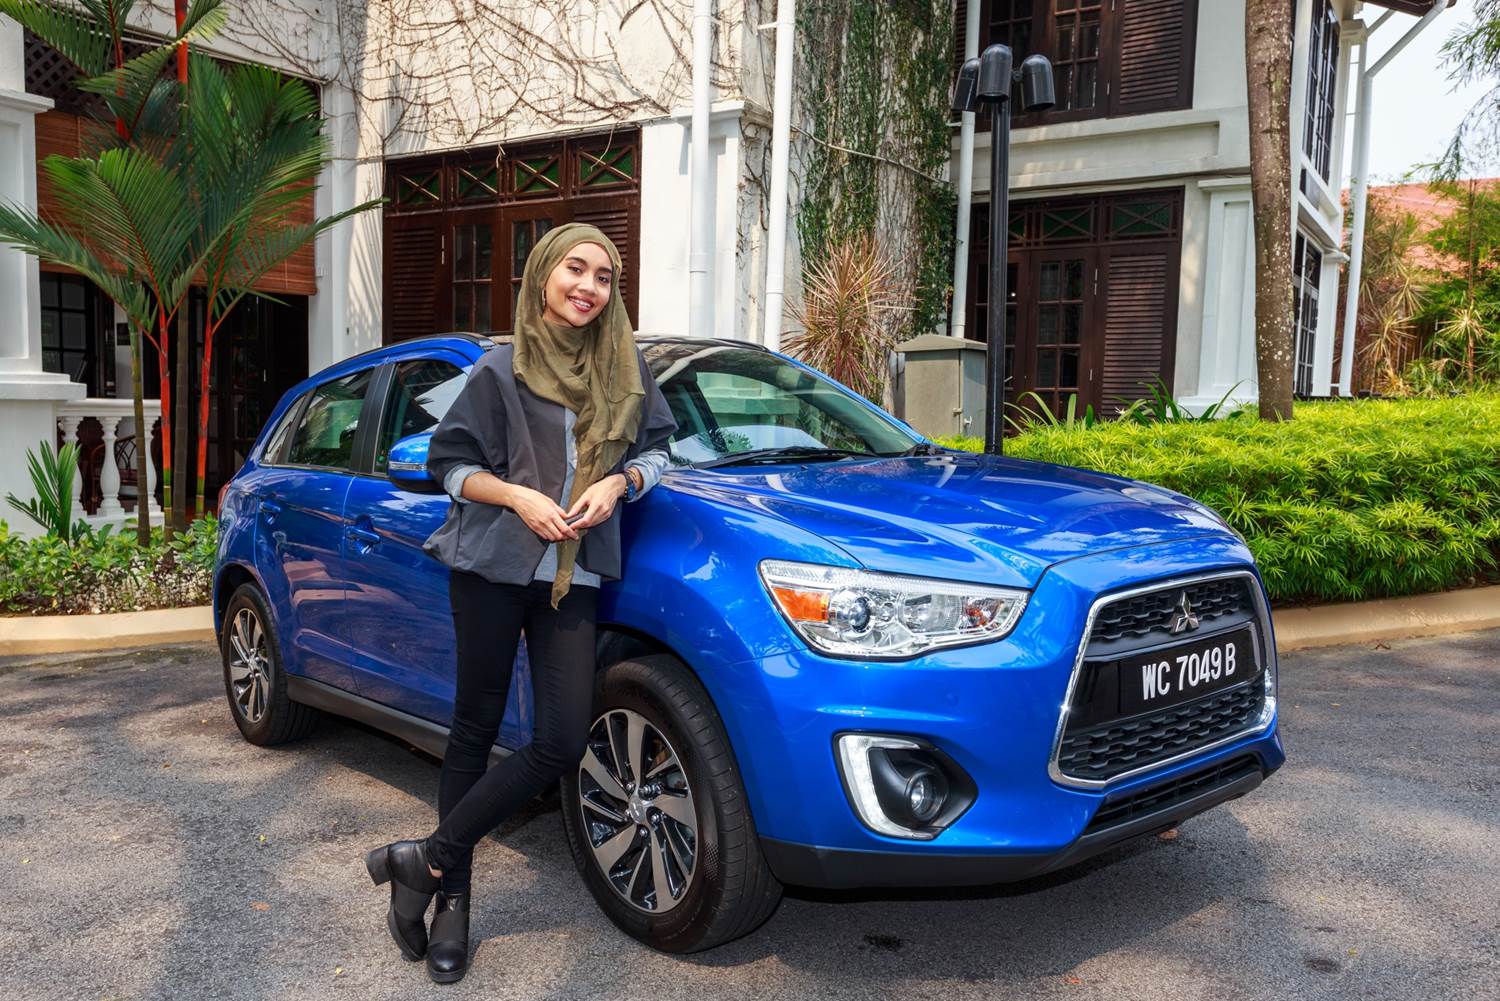 Malaysian singer and song-writer Yuna as the ambassador for the latest Mitsubishi ASX campaign